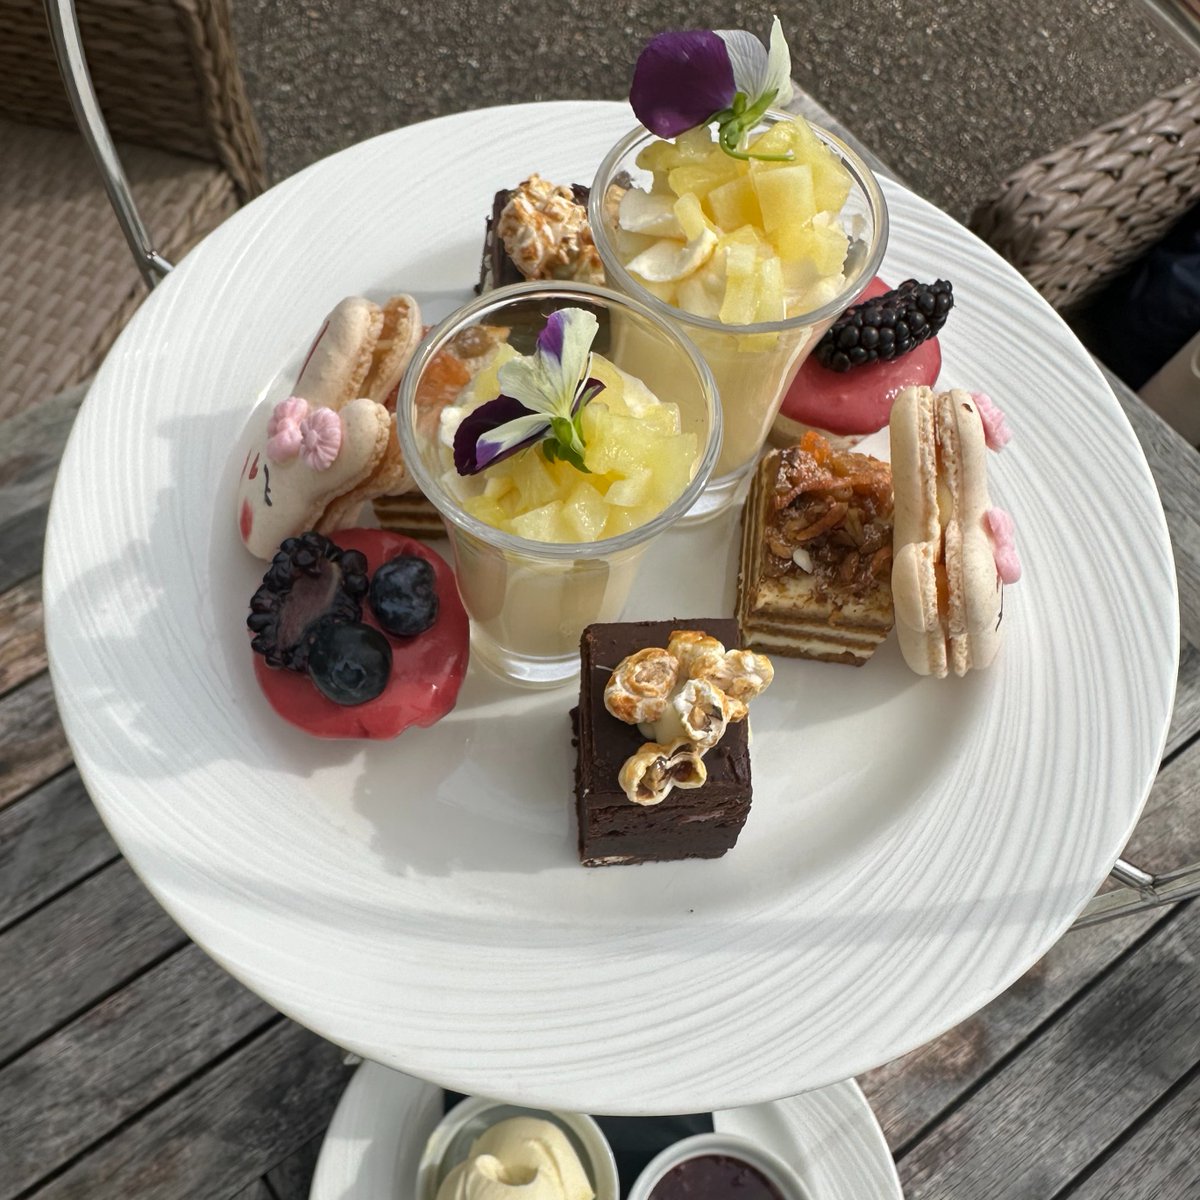 We'll be spending the spring days sitting outside in our stunning gardens enjoying our Afternoon Tea! 🌷 How will you be spending your spring? 📸 - bit.ly/3PYNwbX #BillesleyManor #HotelAndSpa #StratfordUponAvon #AfternoonTea #Spring #Sunshine #Gardens